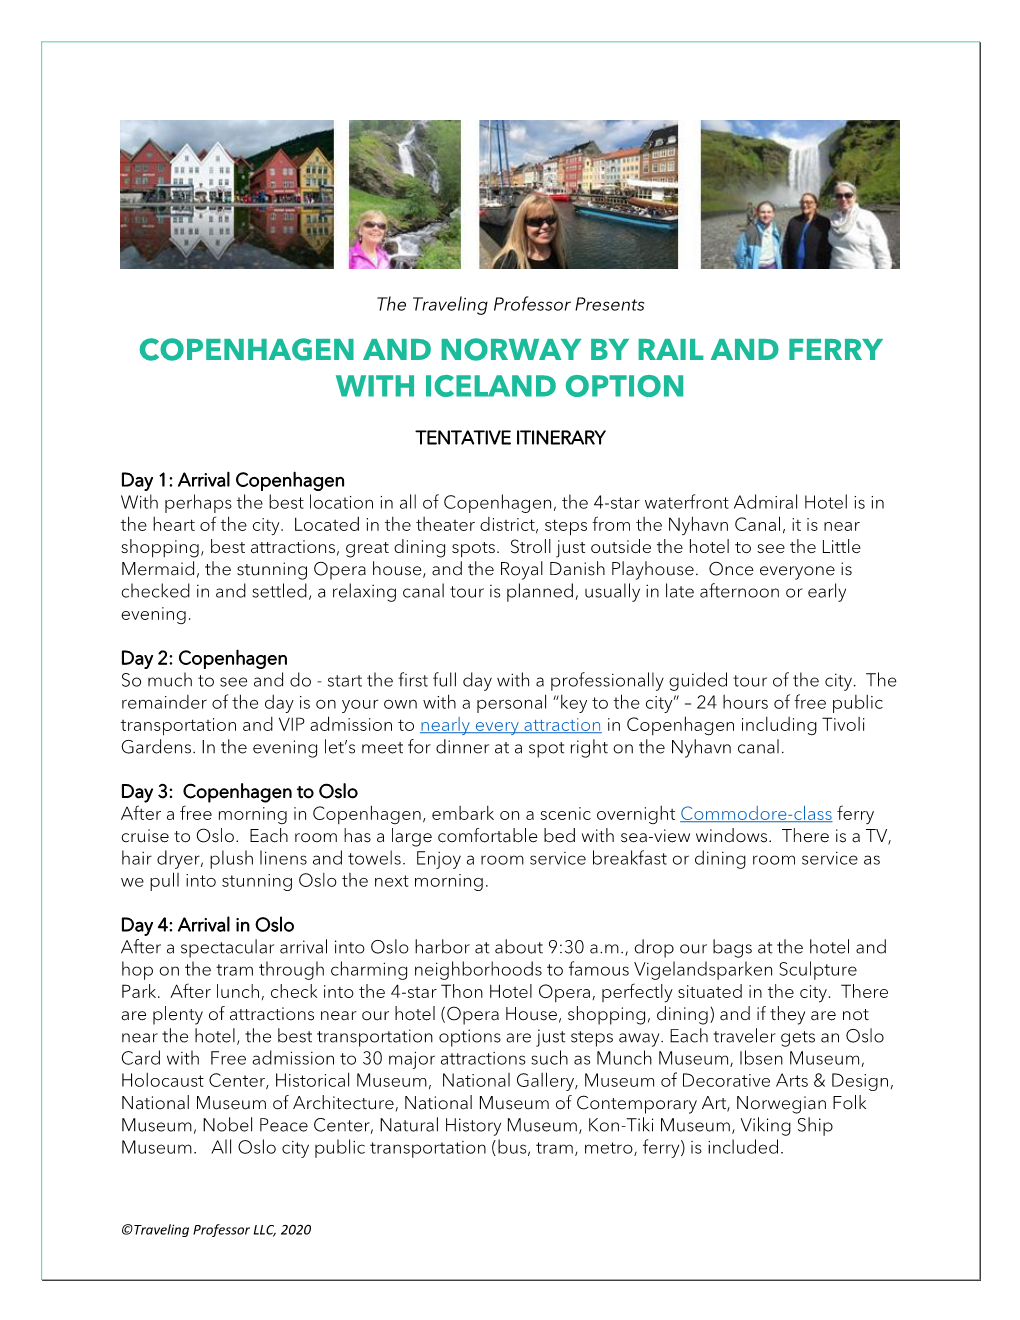 Copenhagen and Norway by Rail and Ferry with Iceland Option